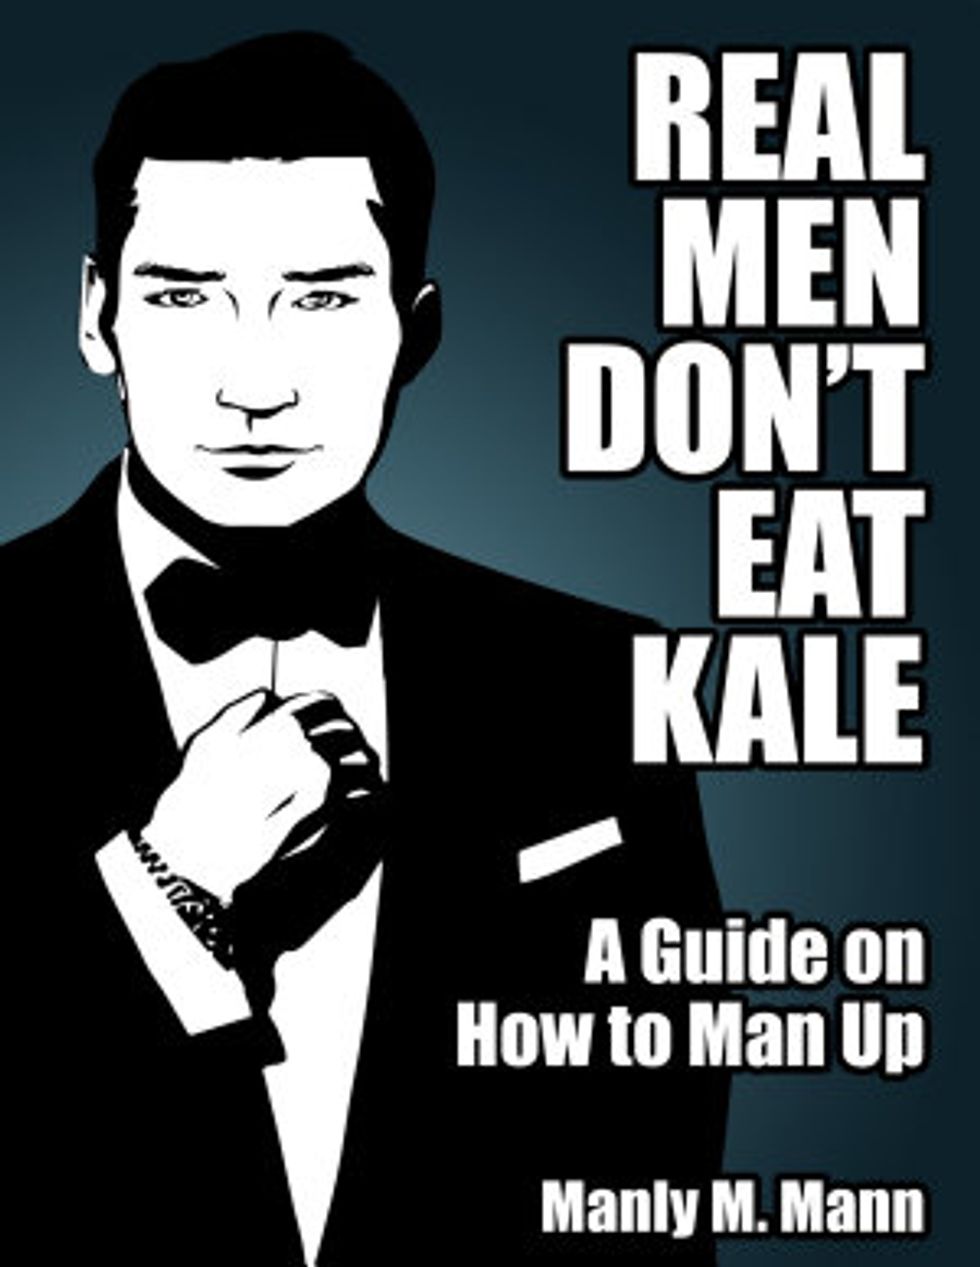 real men don't eat kale book cover